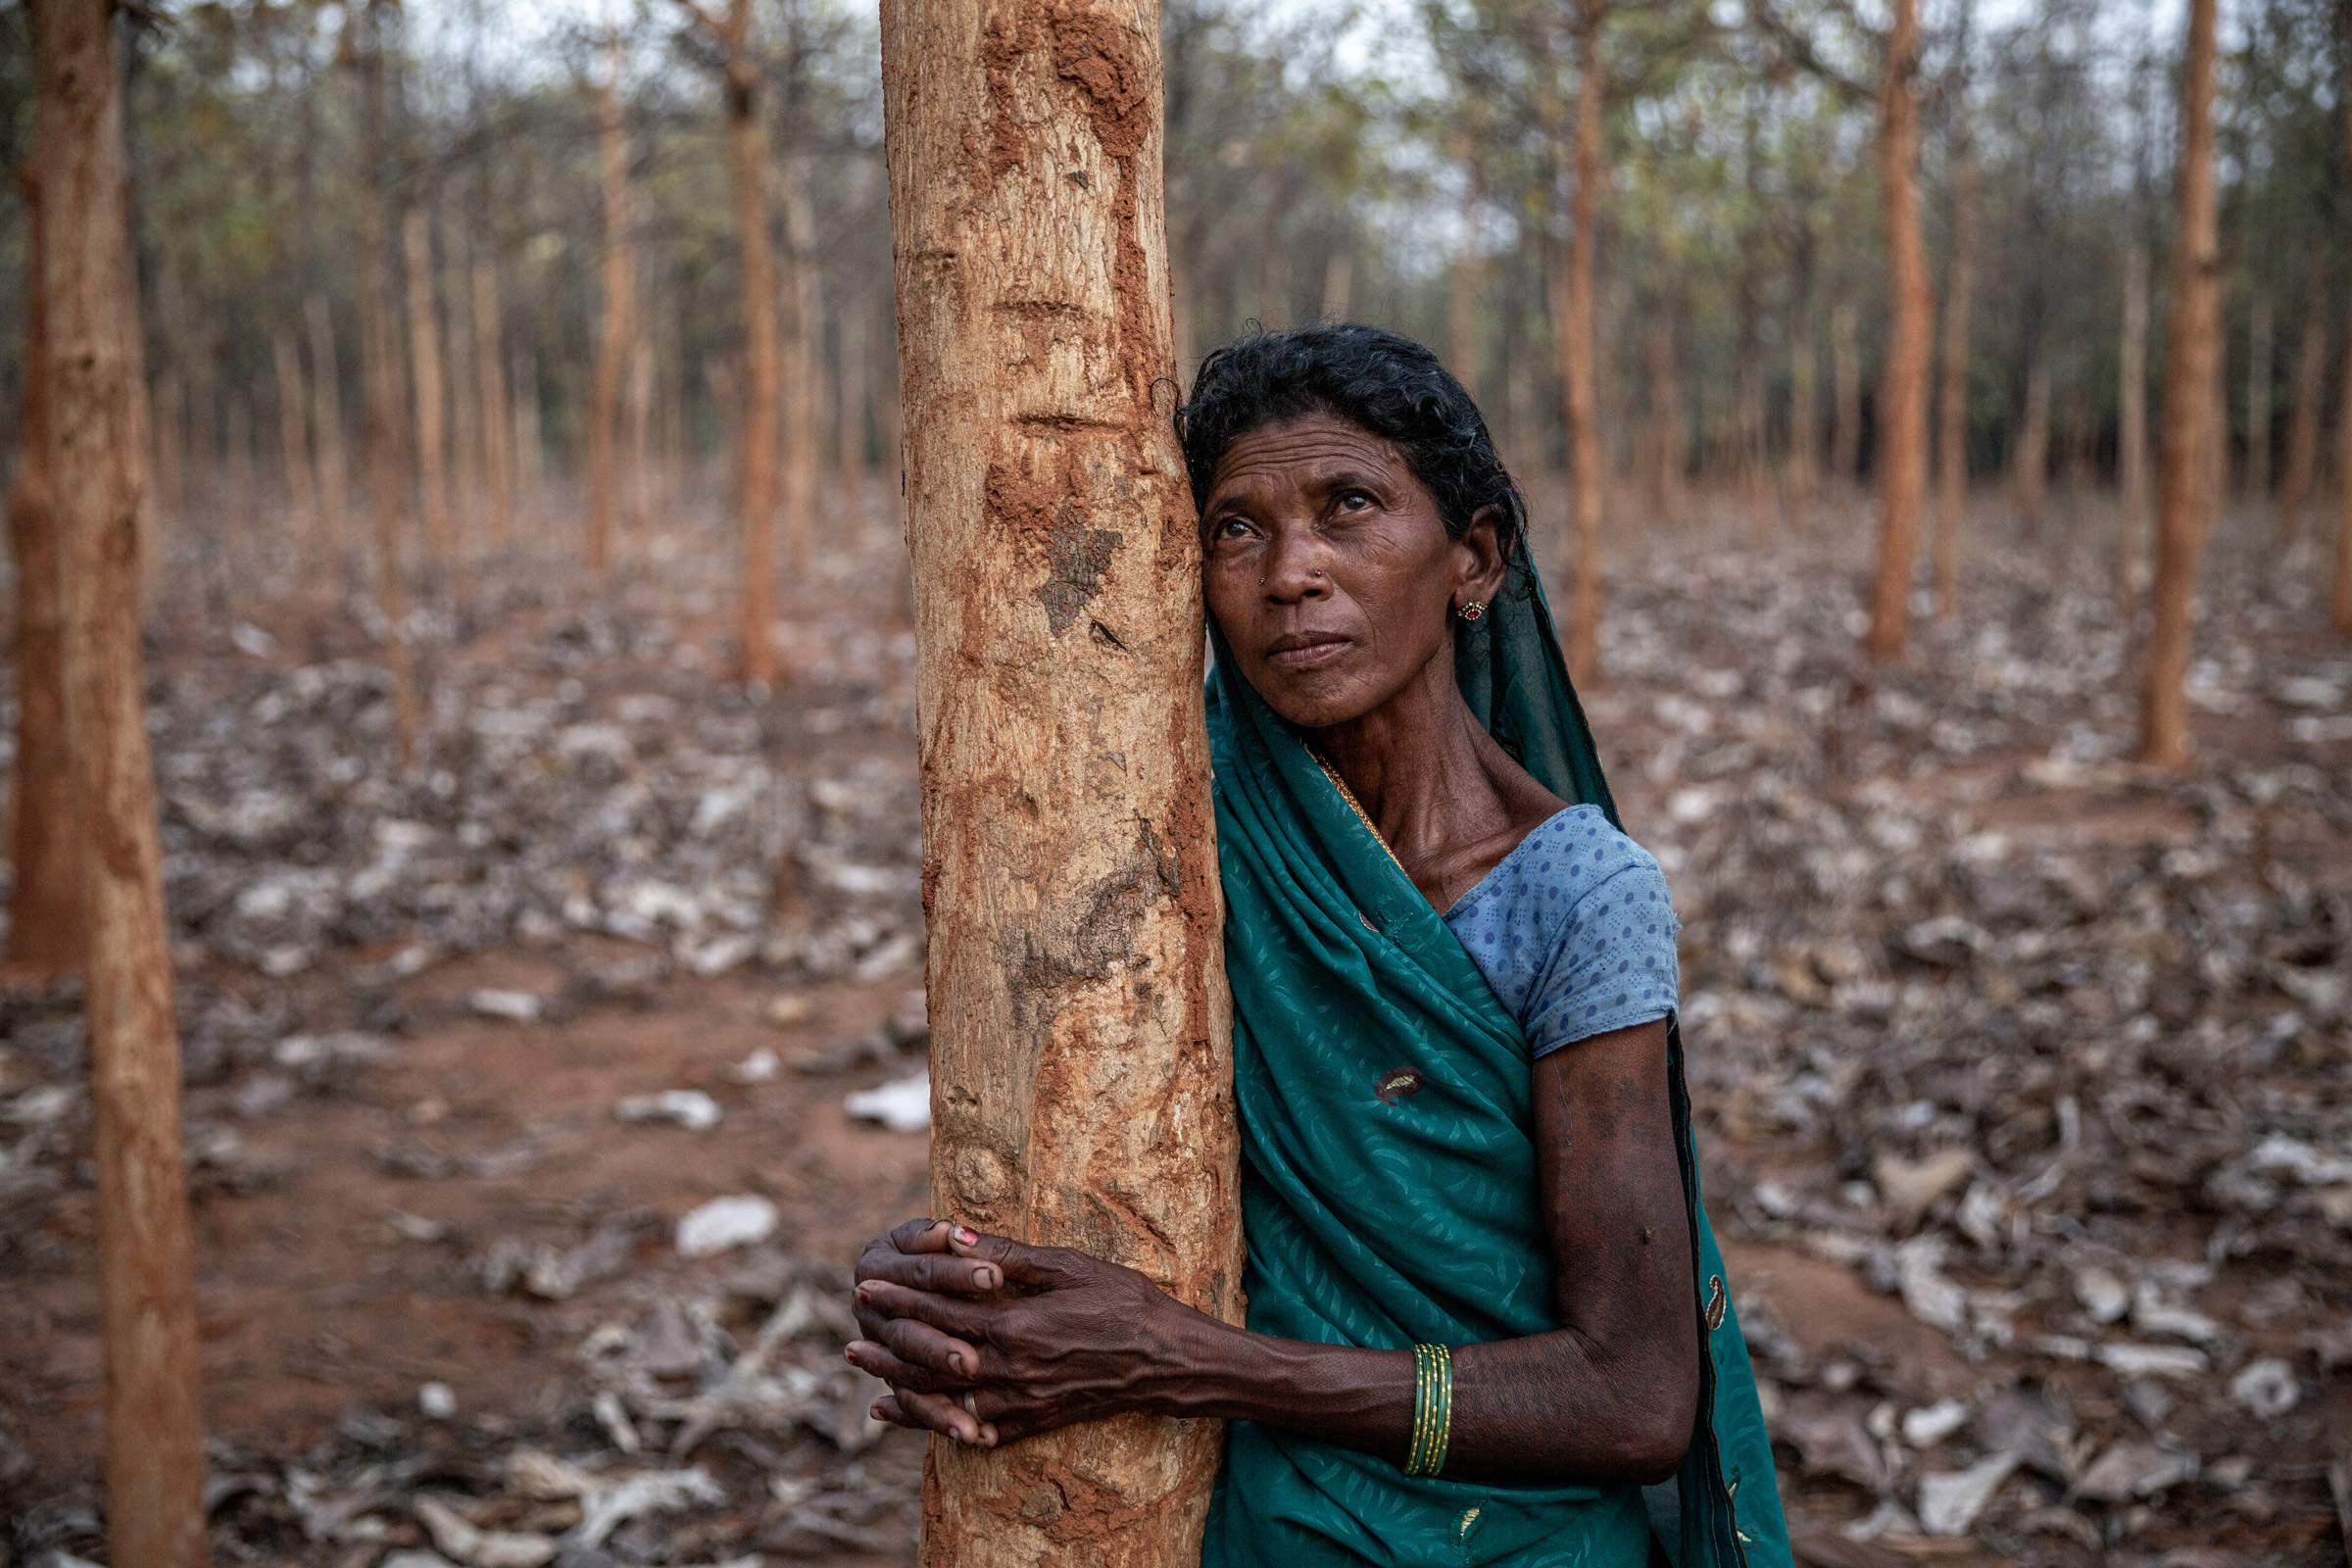 An indigenous woman hugs a tree in a forest that will soon be cut down due to coal mine expansion at Chhattisgarh's Surguja district.